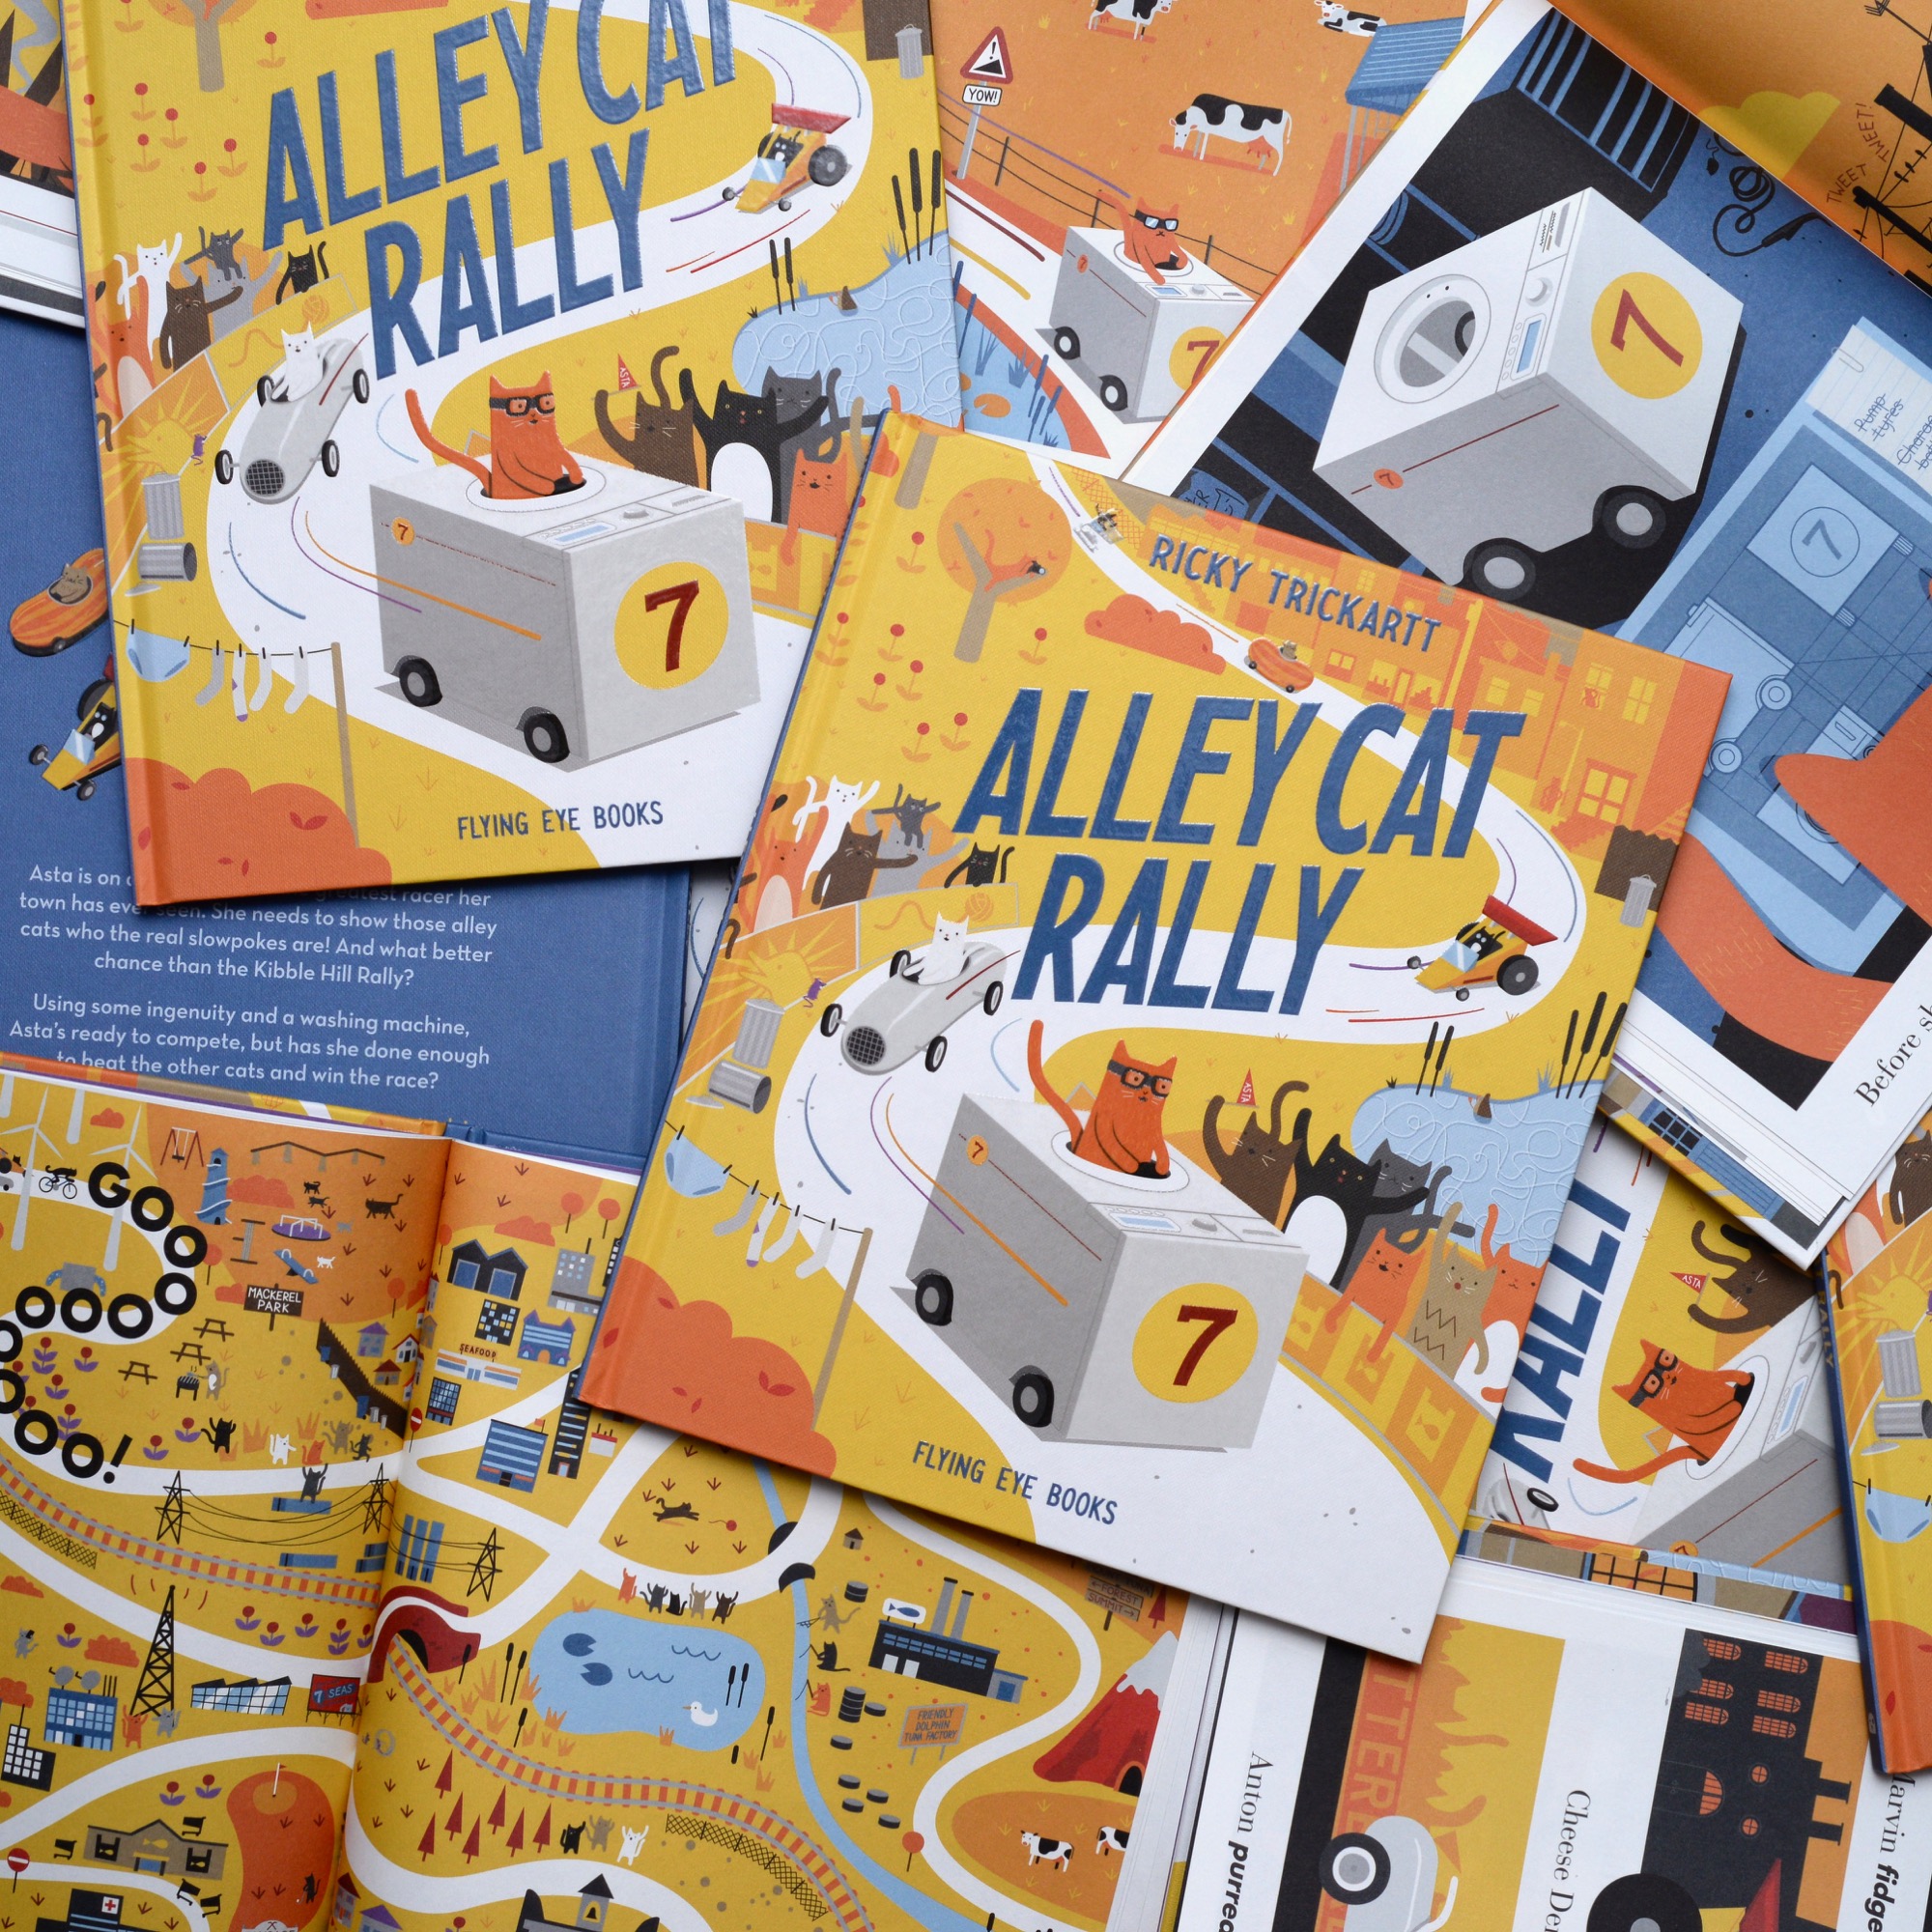 copies of Alley Cat Rally by Ricky Trickartt